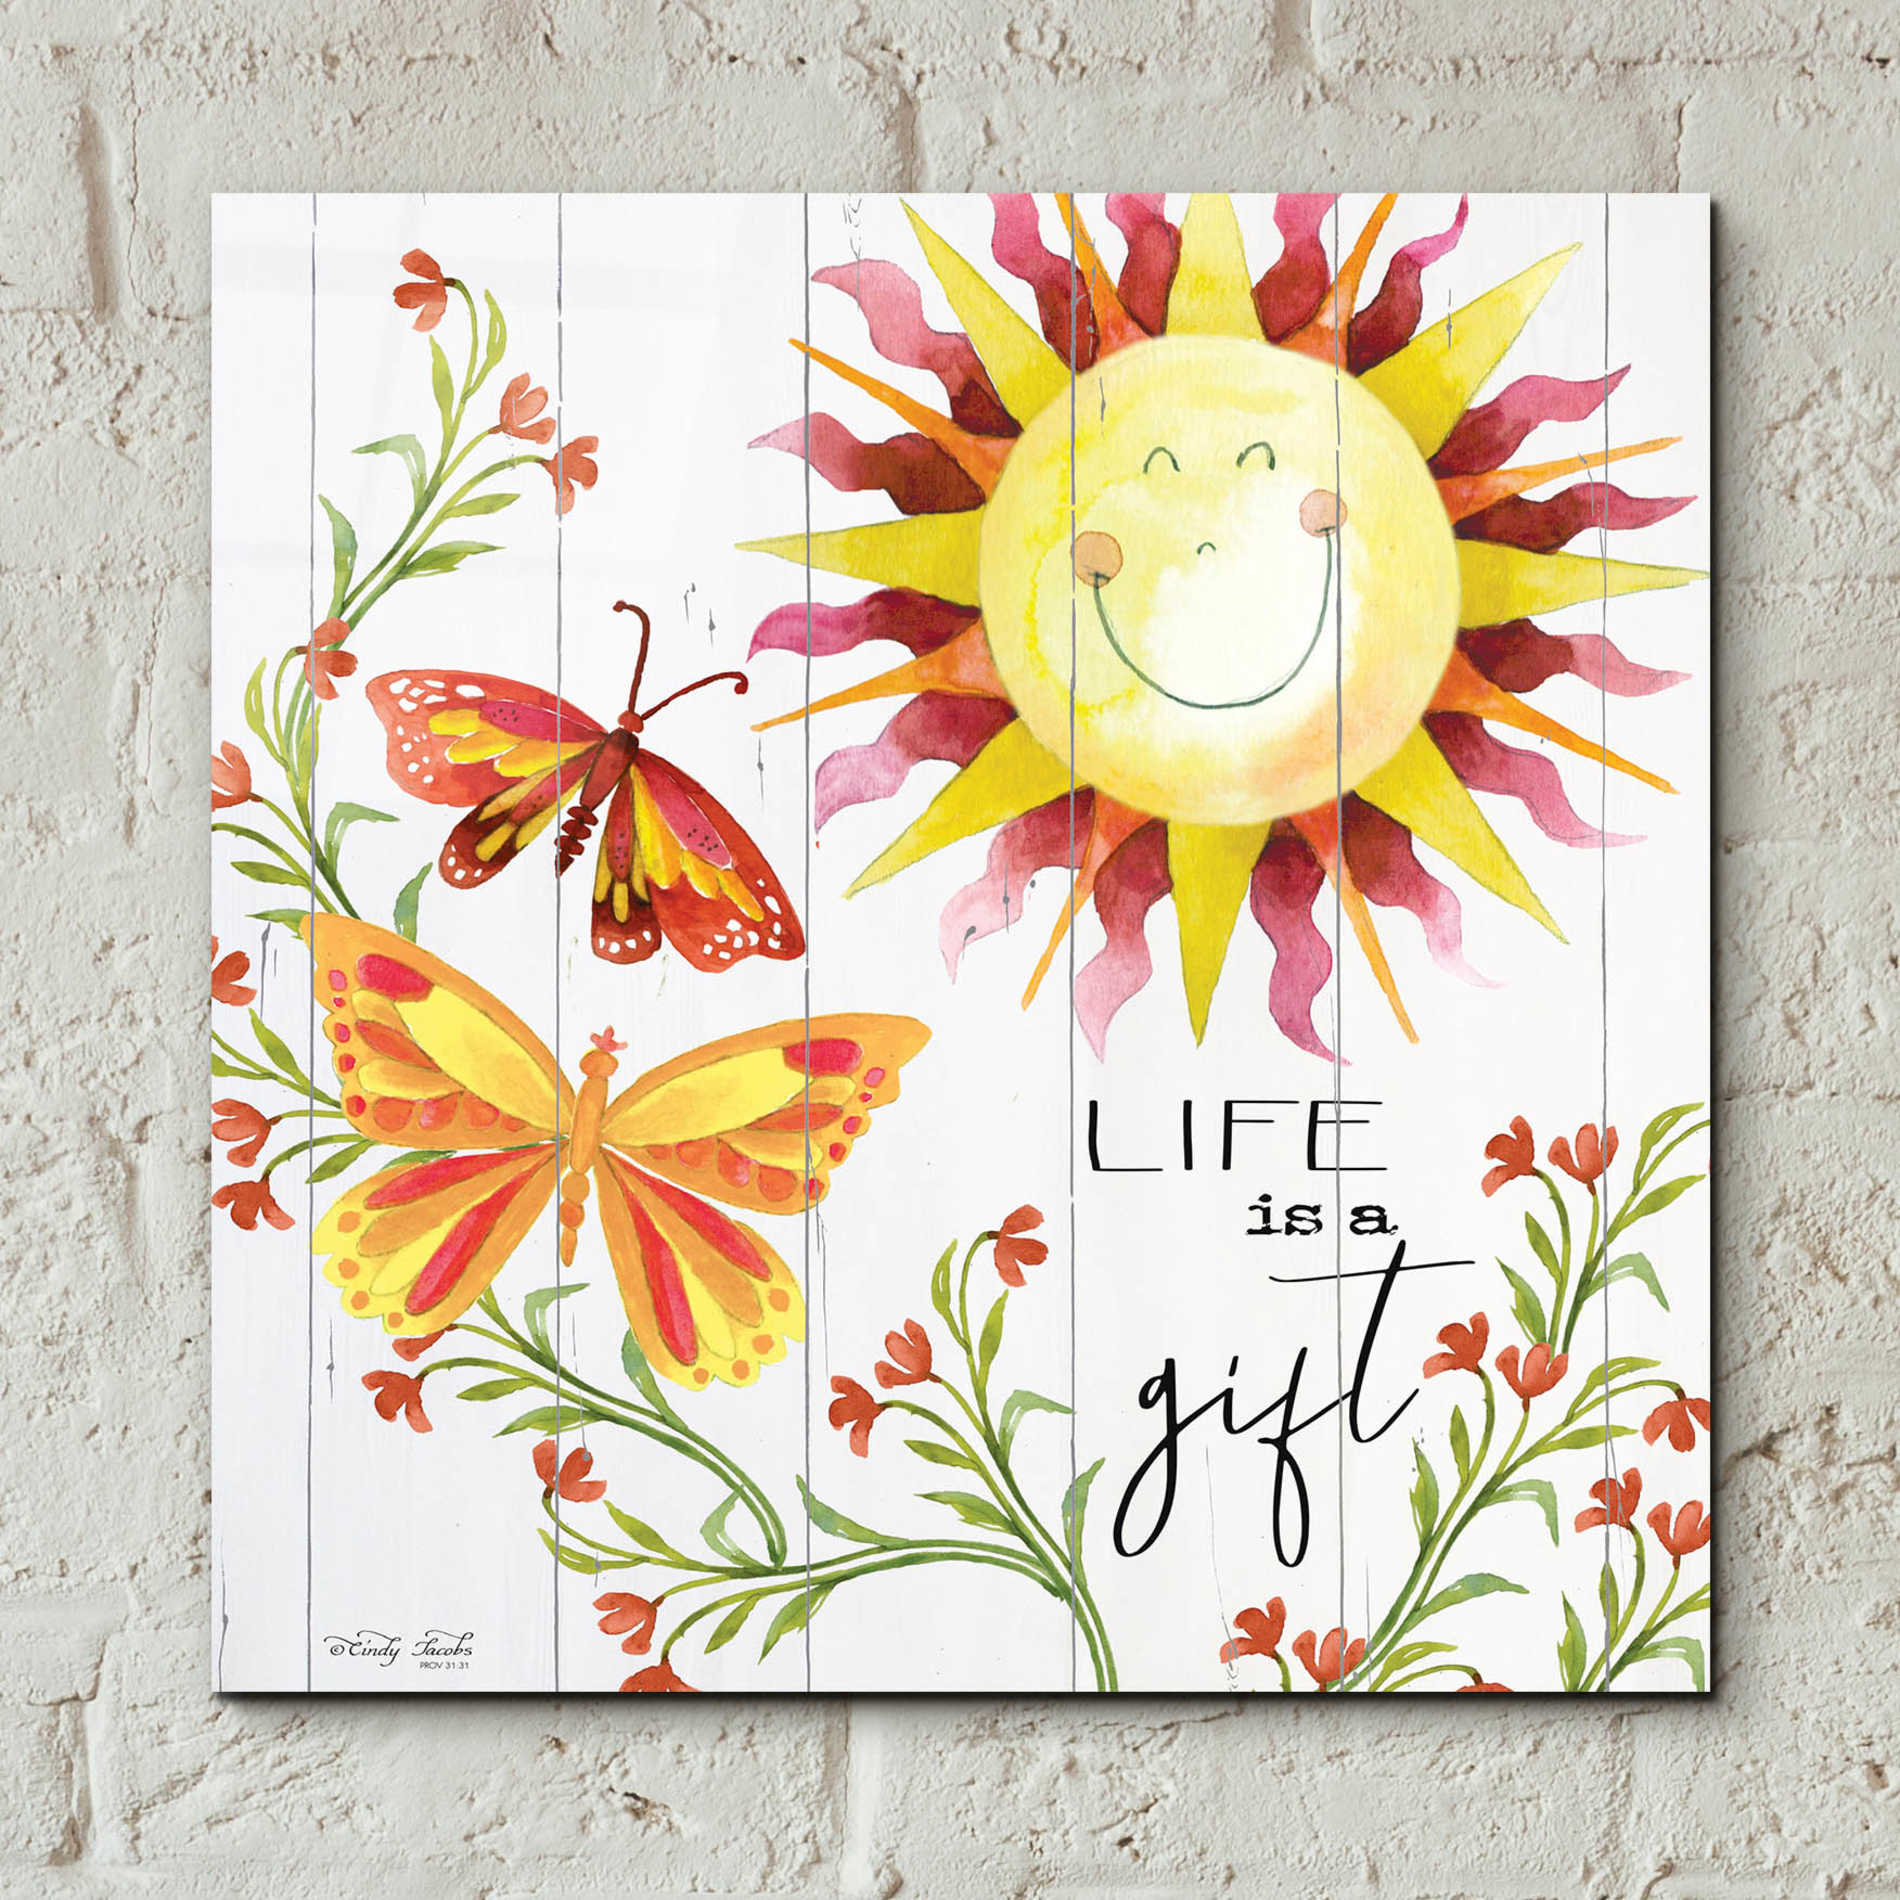 Epic Art 'Life is a Gift' by Cindy Jacobs, Acrylic Glass Wall Art,12x12